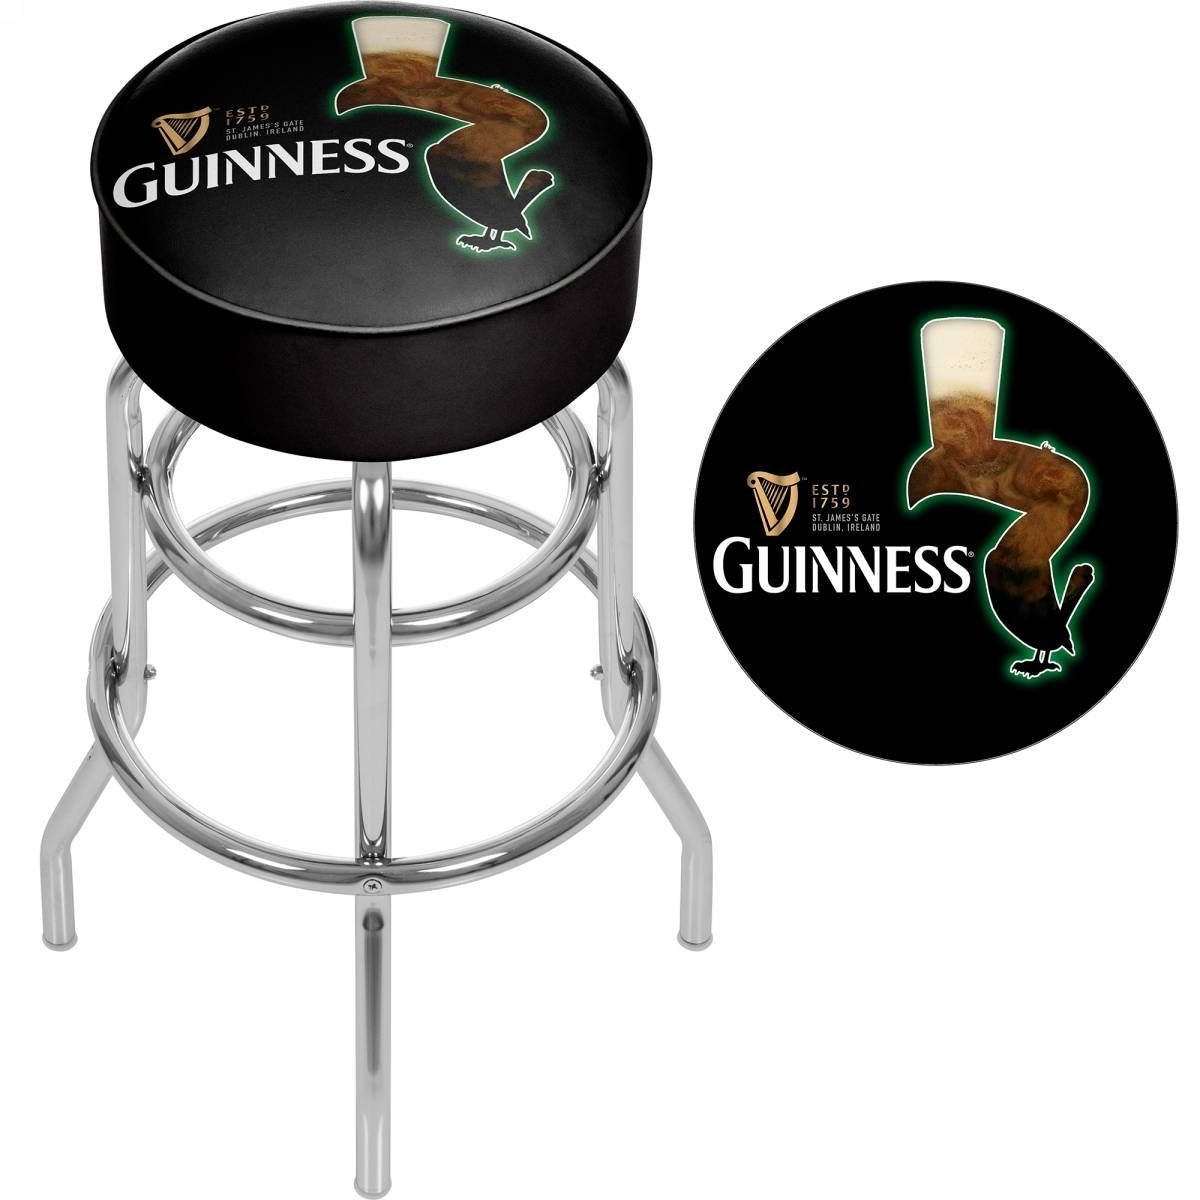 A licensed Guinness Padded Swivel Bar Stool - Feathering featuring the iconic Guinness logo.